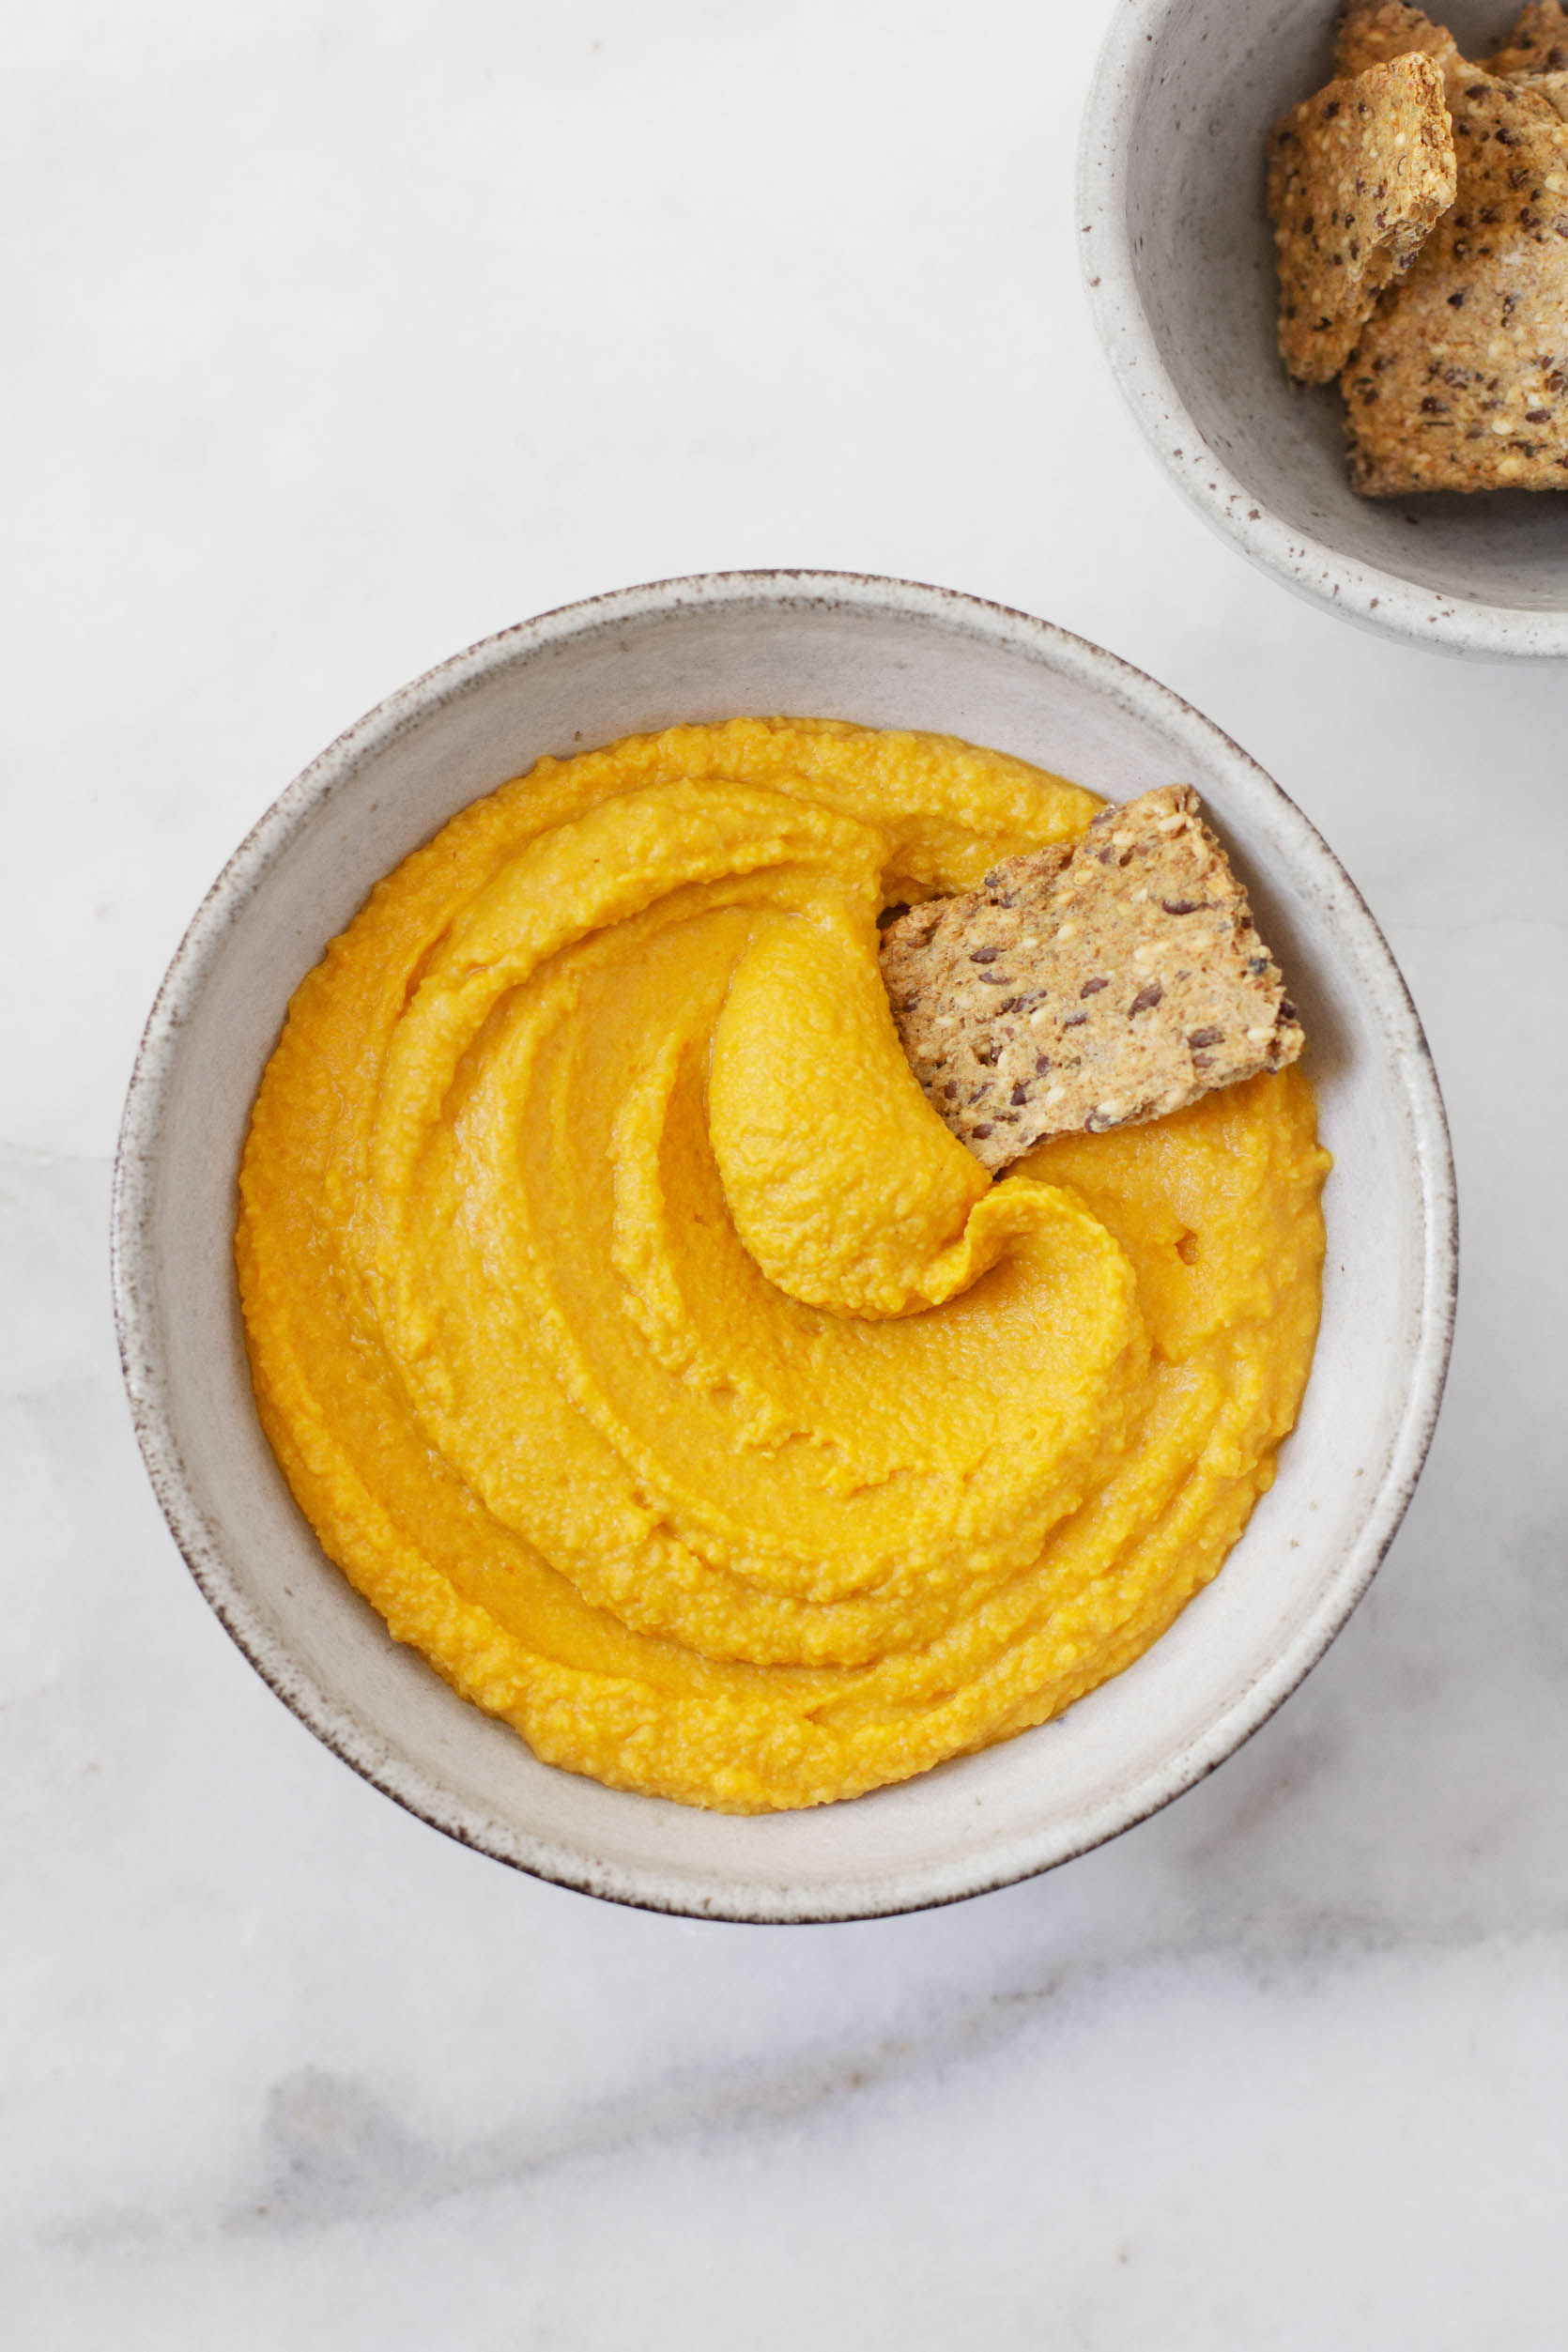 Roasted Carrot Hummus | A Creamy, Sweet Dip and Spread